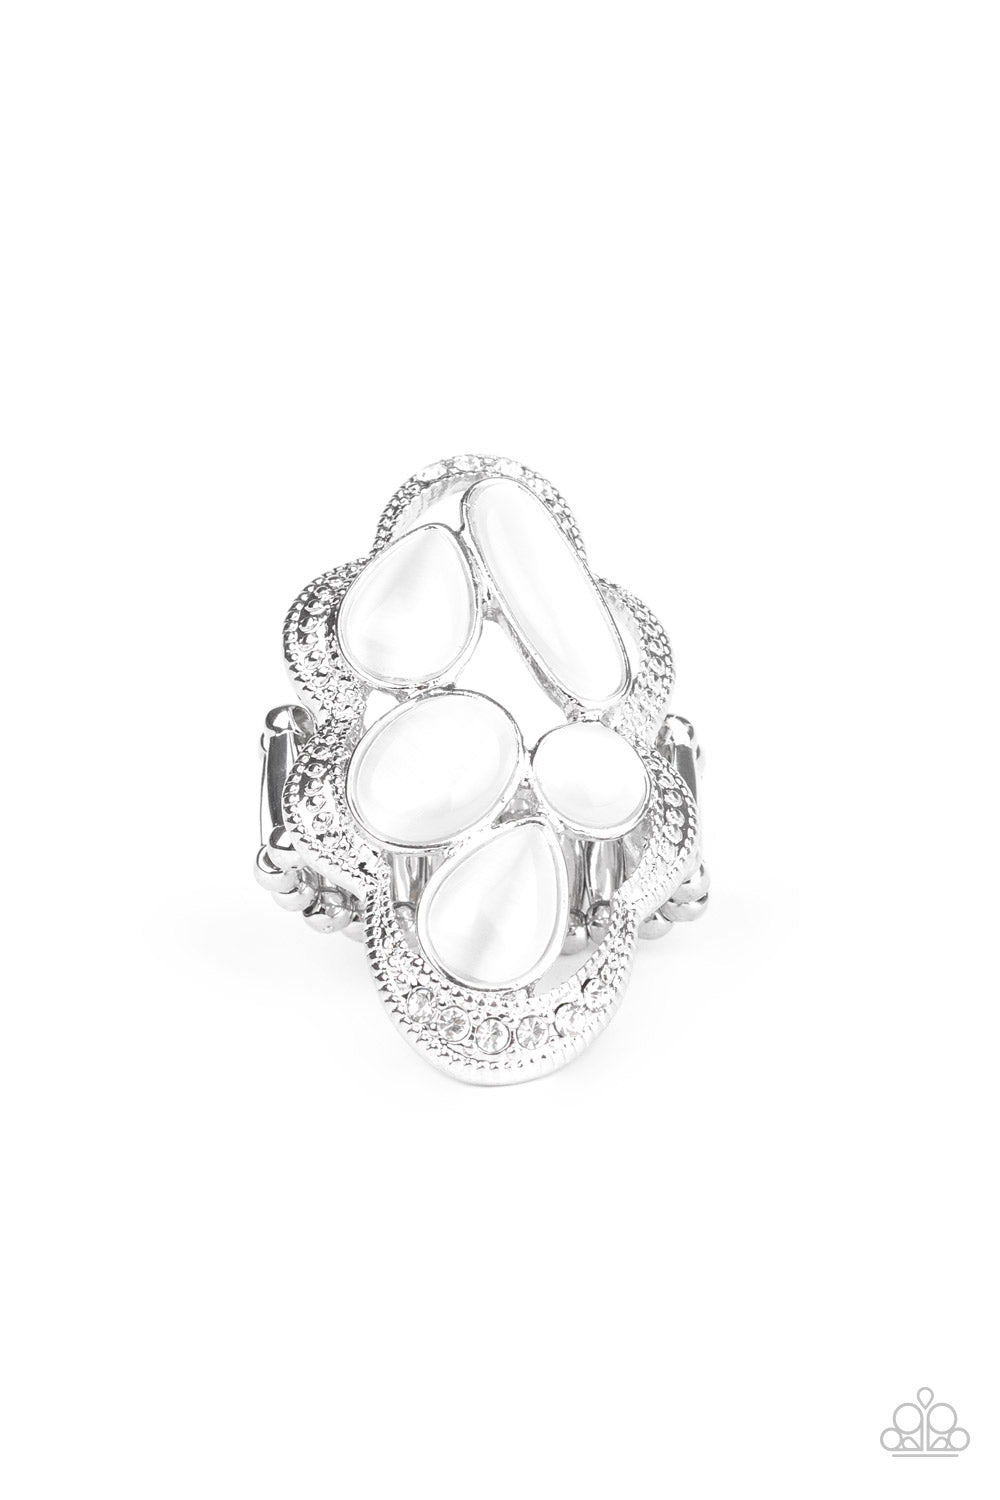 Paparazzi Rings - Cherished Collection - White